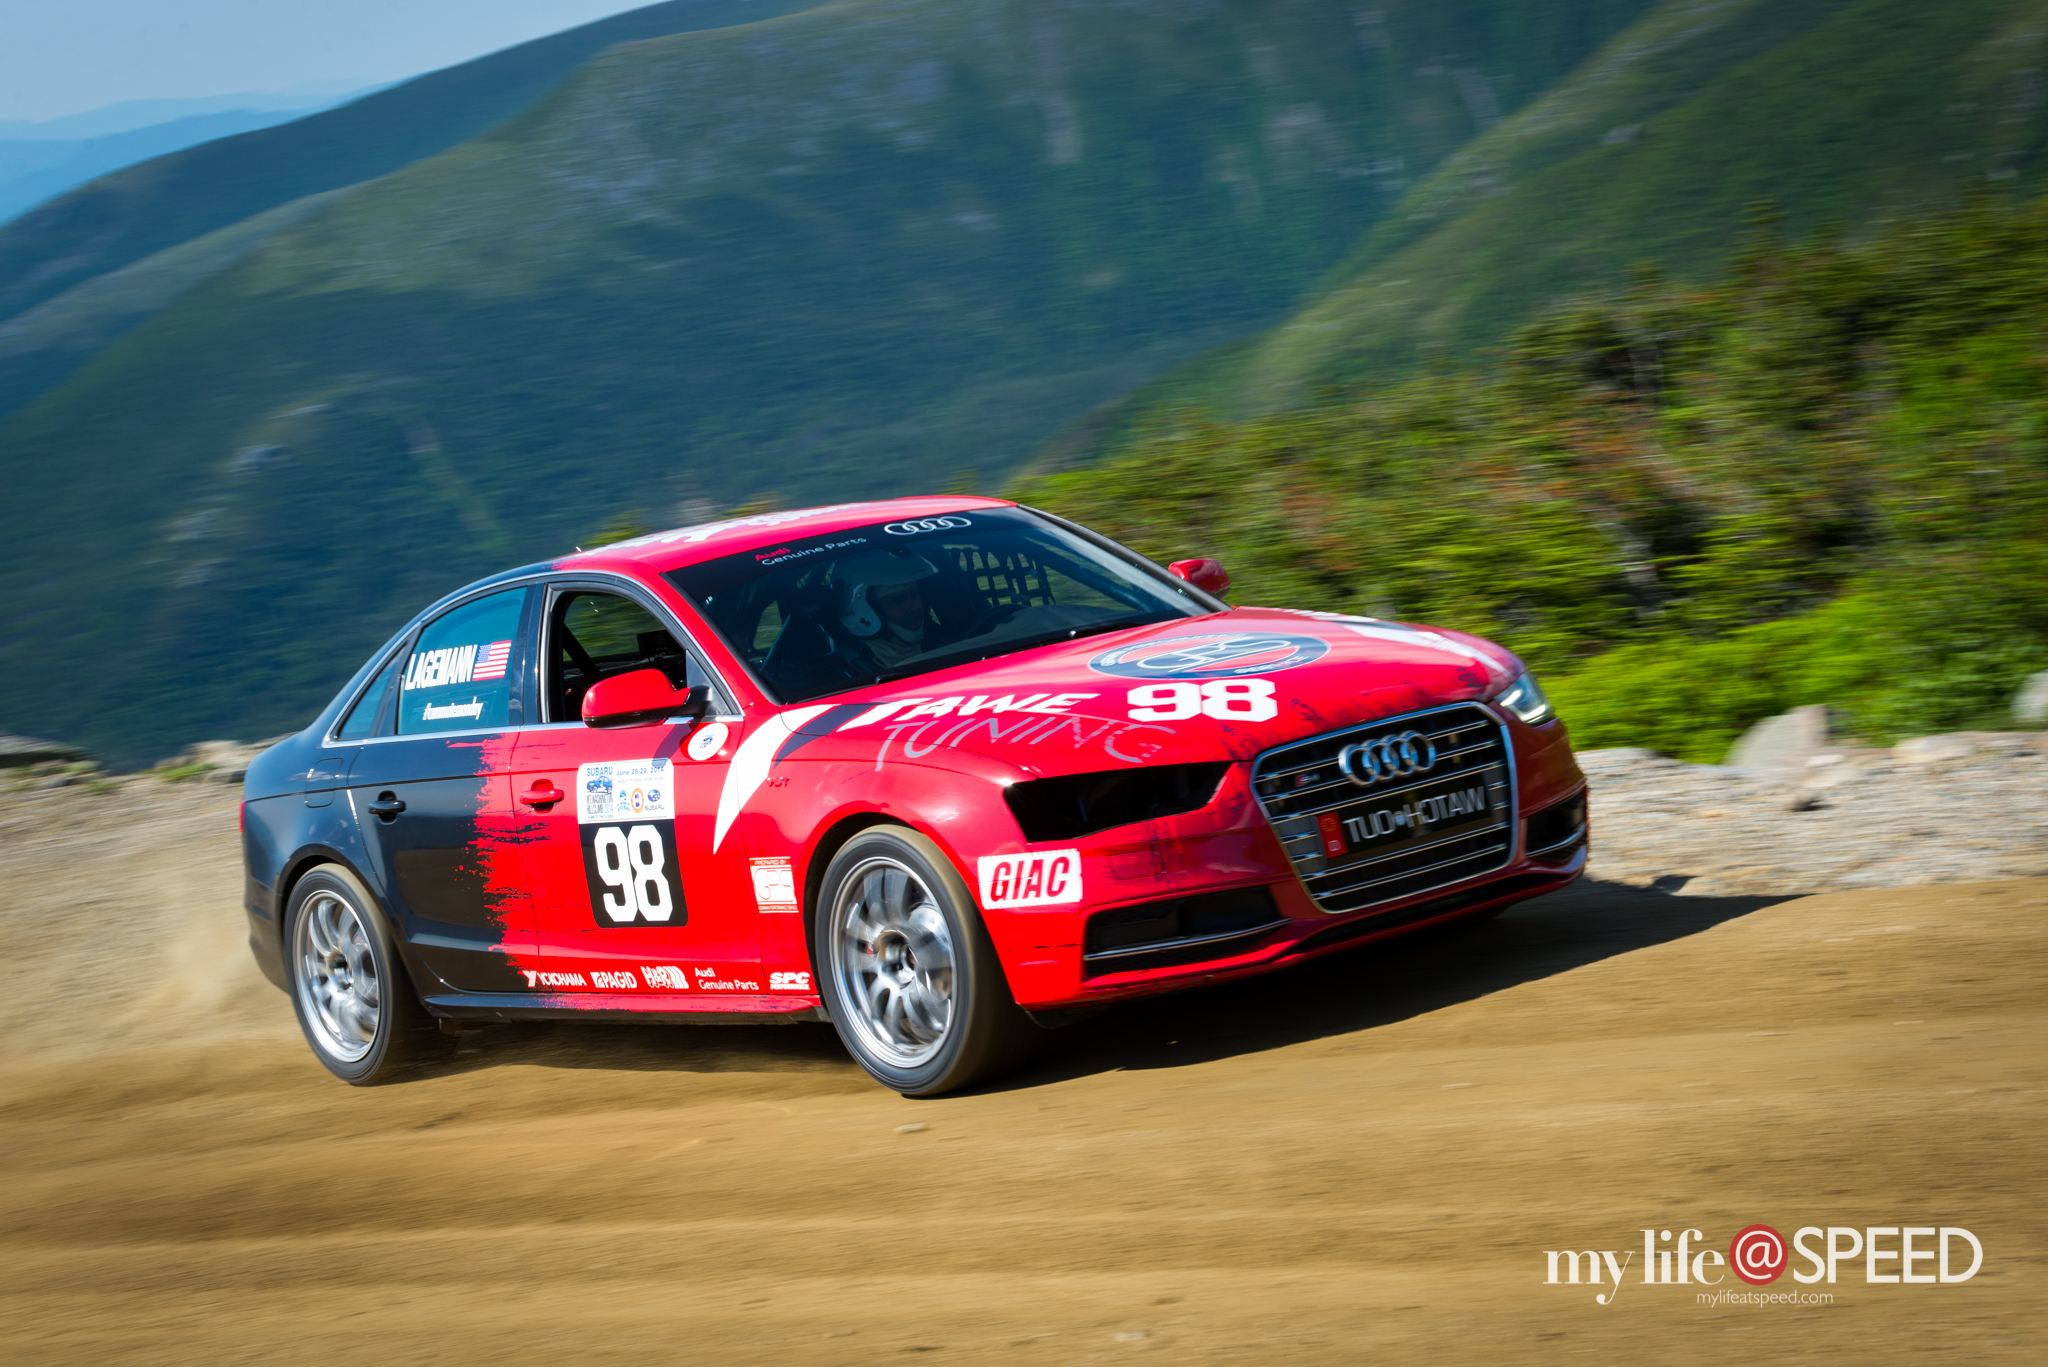 This Audi was a sight to see. Loud, fast and fun to watch